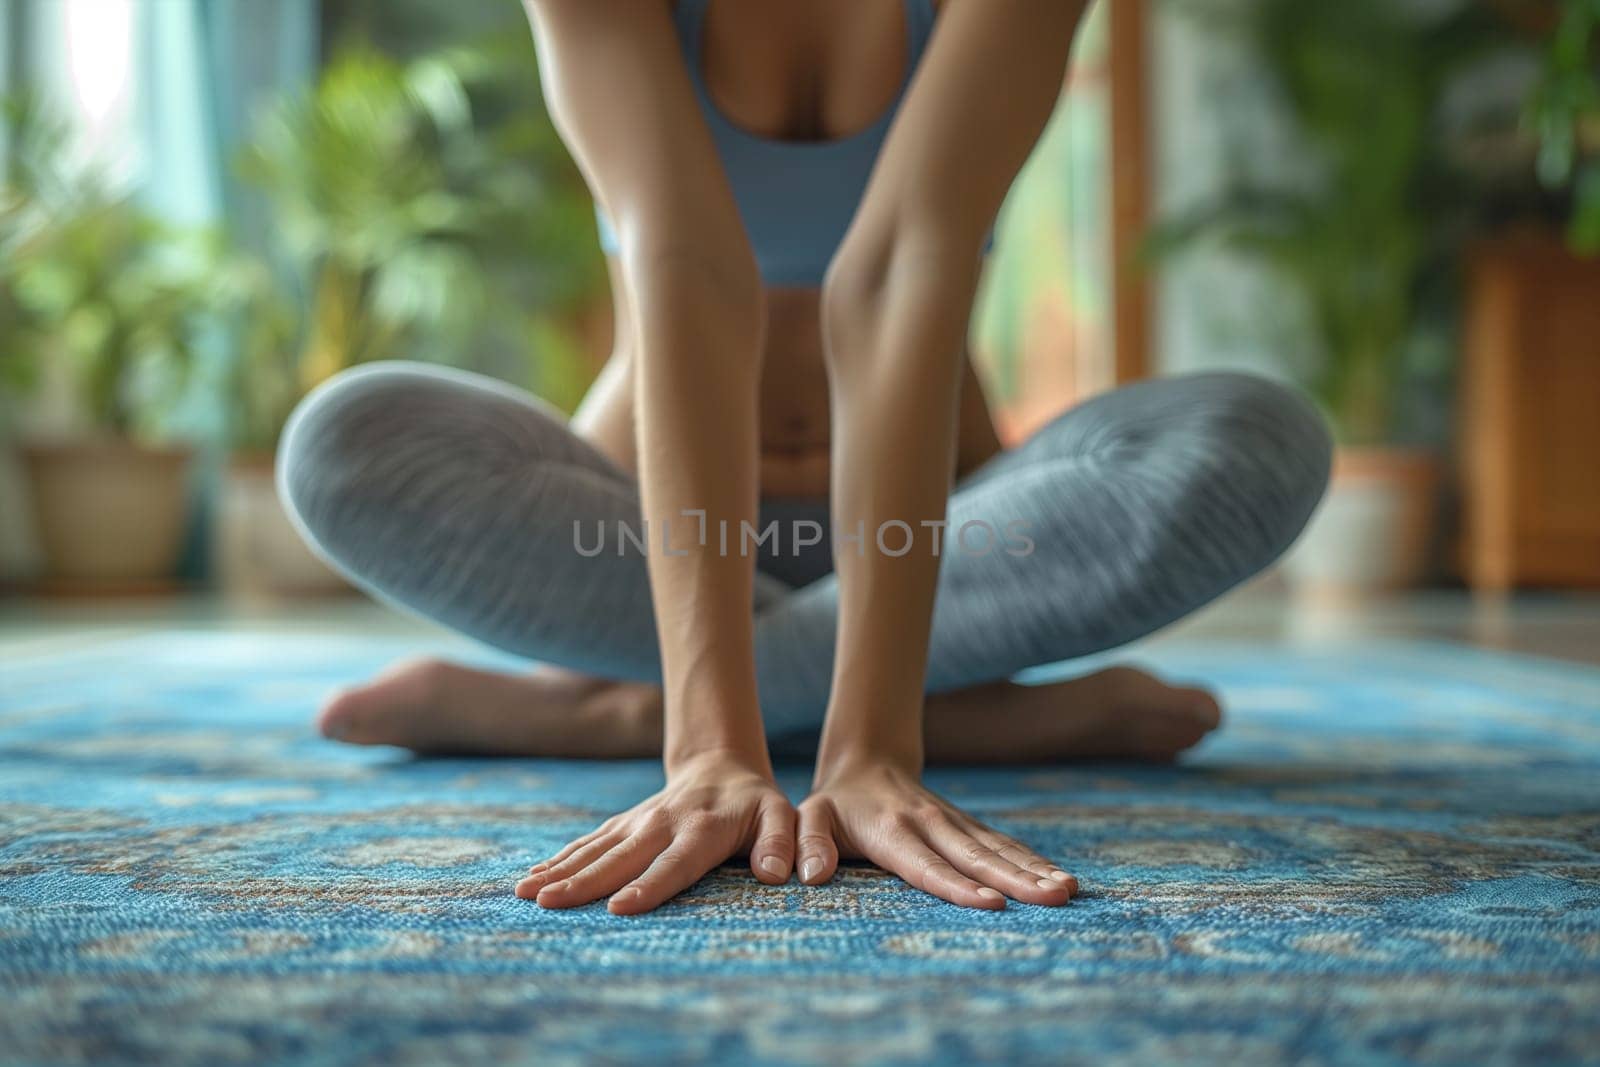 Woman Practicing Yoga on Floor by Sd28DimoN_1976